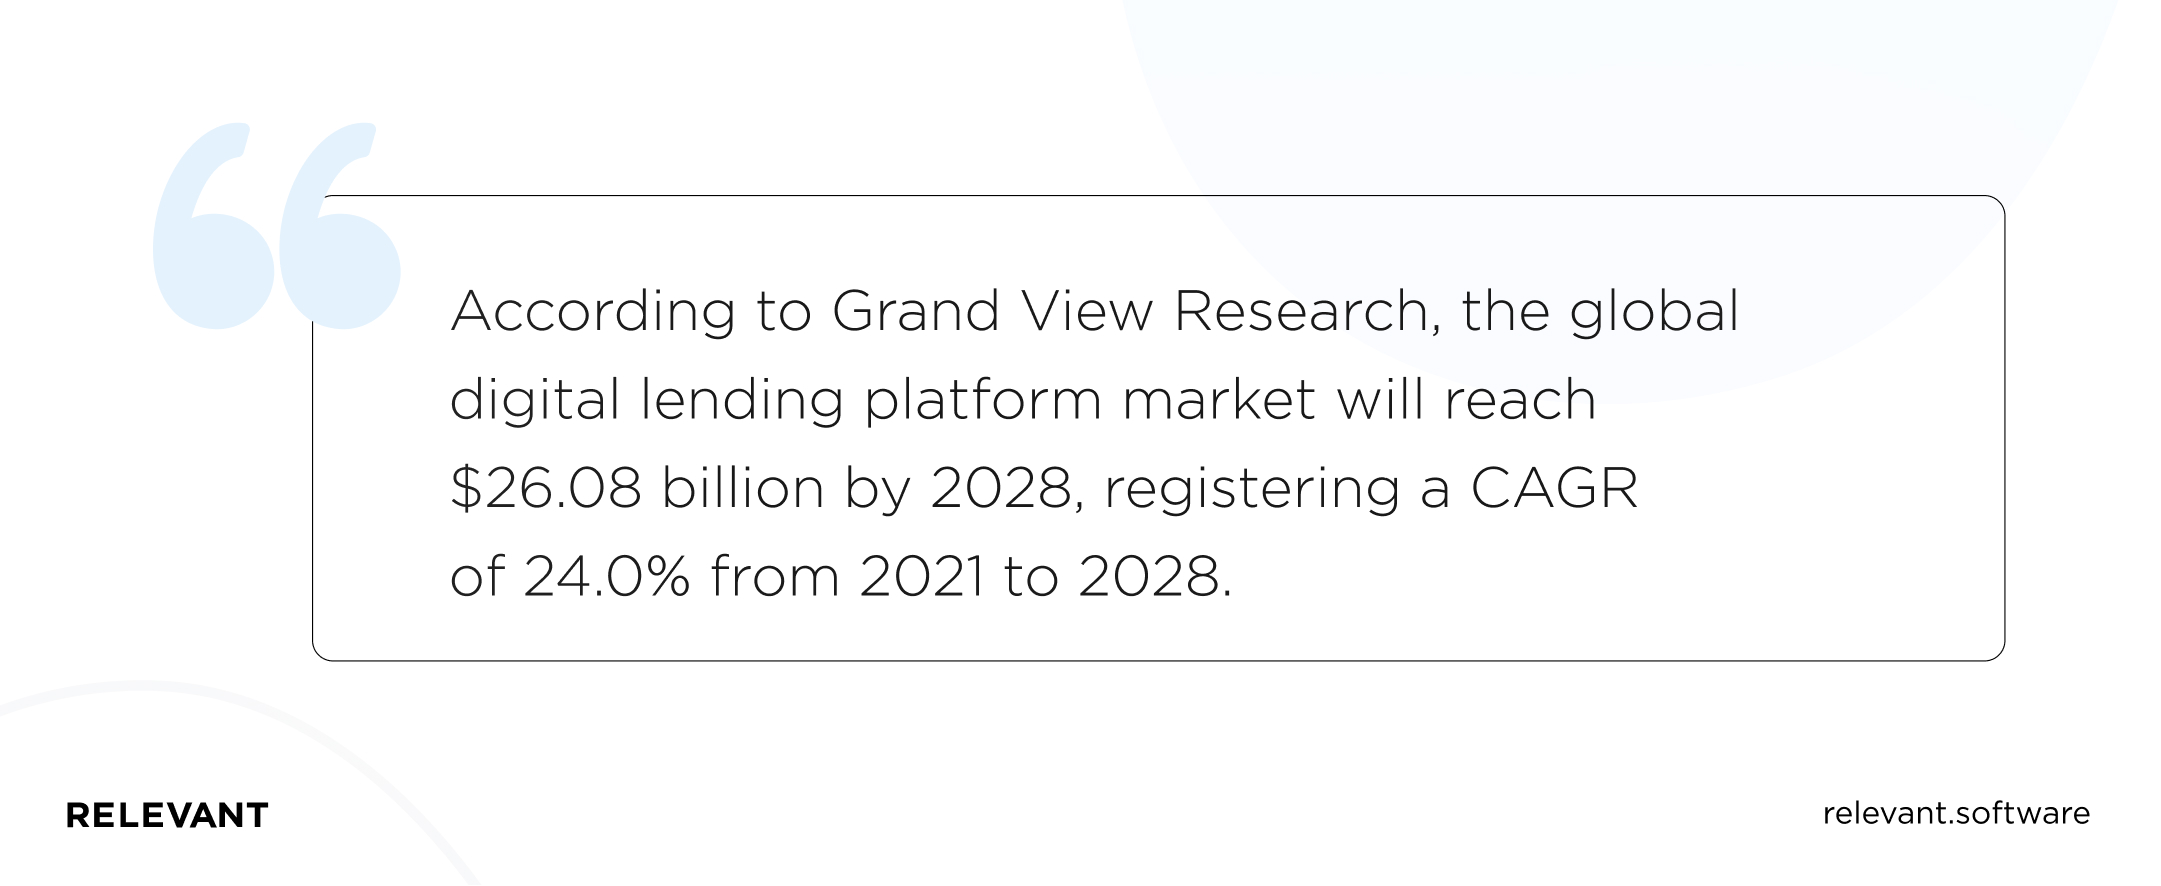 According to Grand View Research, the global digital lending platform market will reach .08 billion by 2028, registering a CAGR of 24.0% from 2021 to 2028.